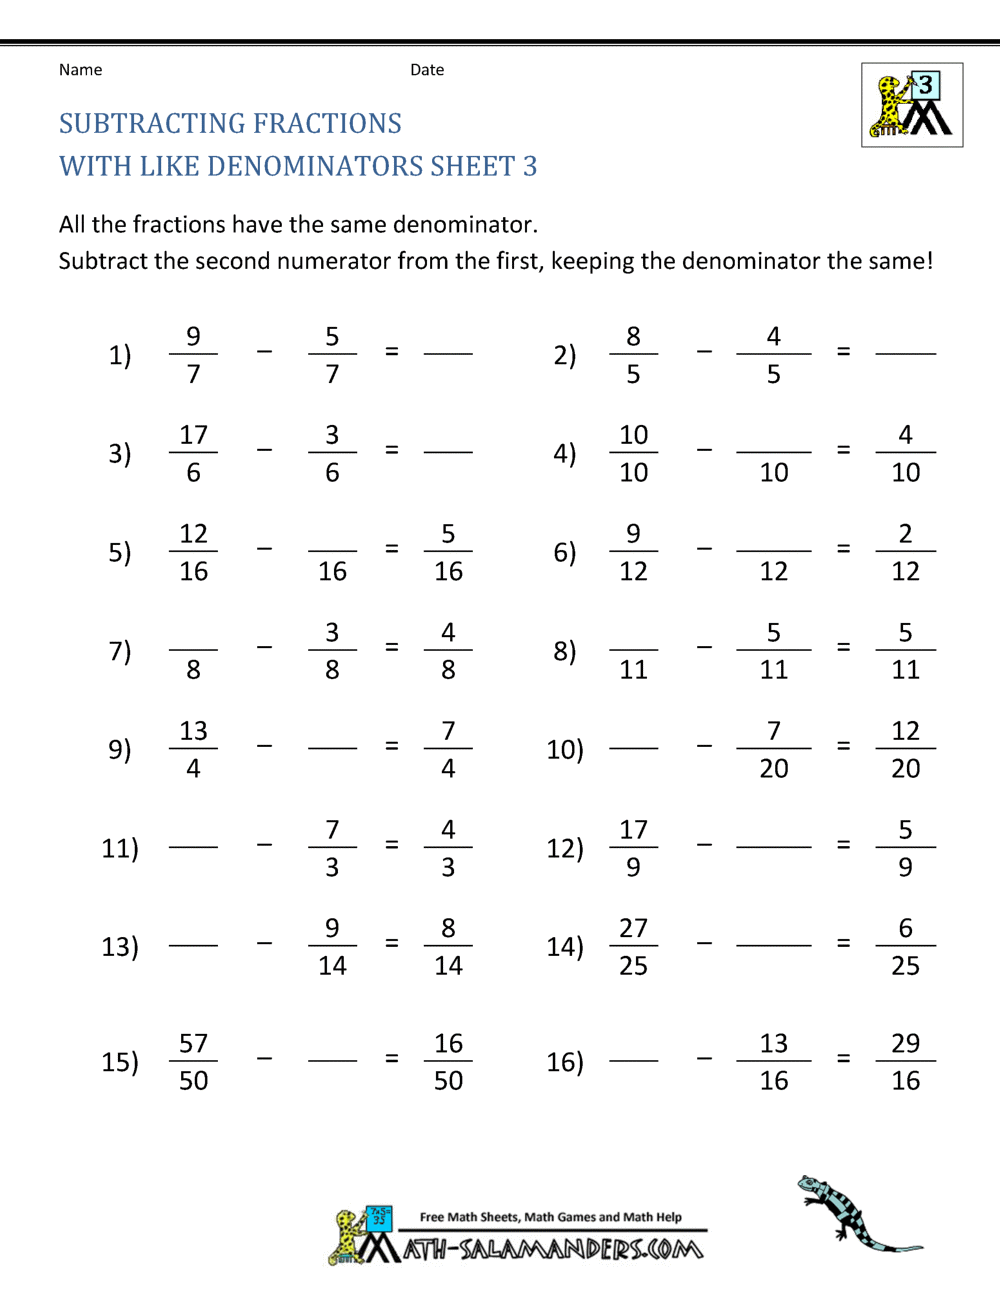 Free Fraction Worksheets Adding Subtracting Fractions math worksheets, worksheets, grade worksheets, and alphabet worksheets Free Fractions Worksheet 1294 x 1000